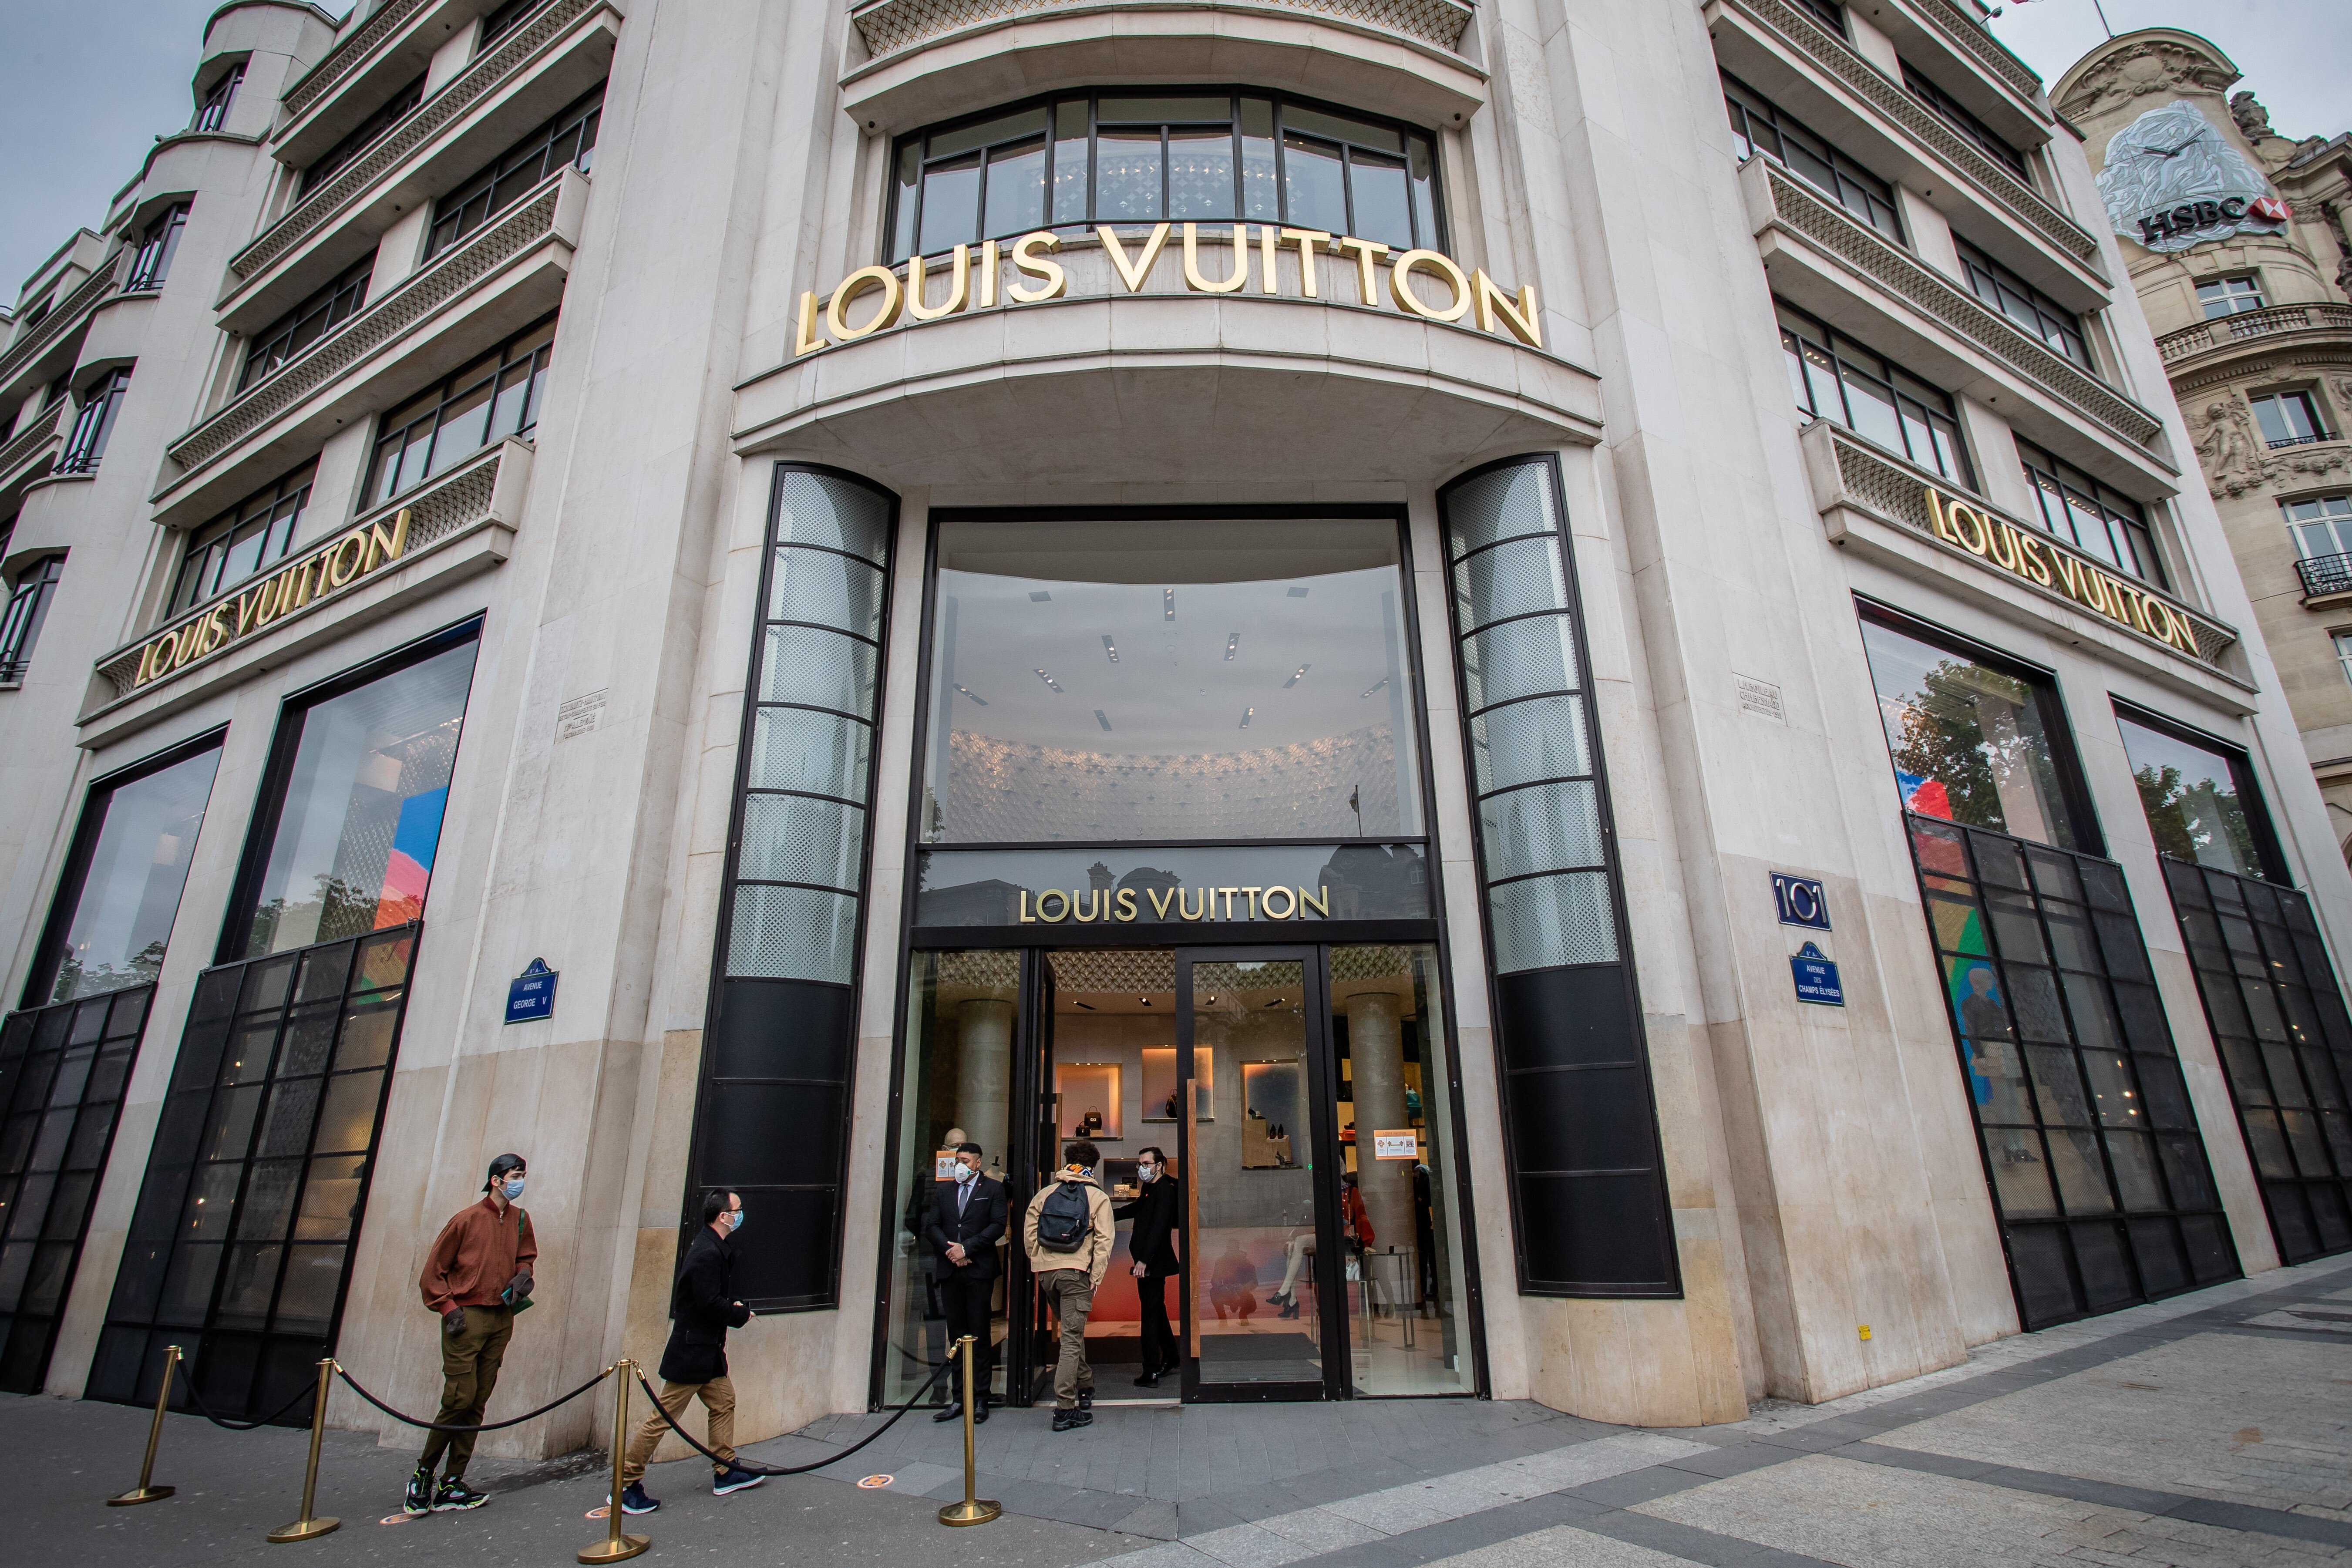 LVMH Shares Rise Amid Strong Demand for Wines and Spirits - TheStreet